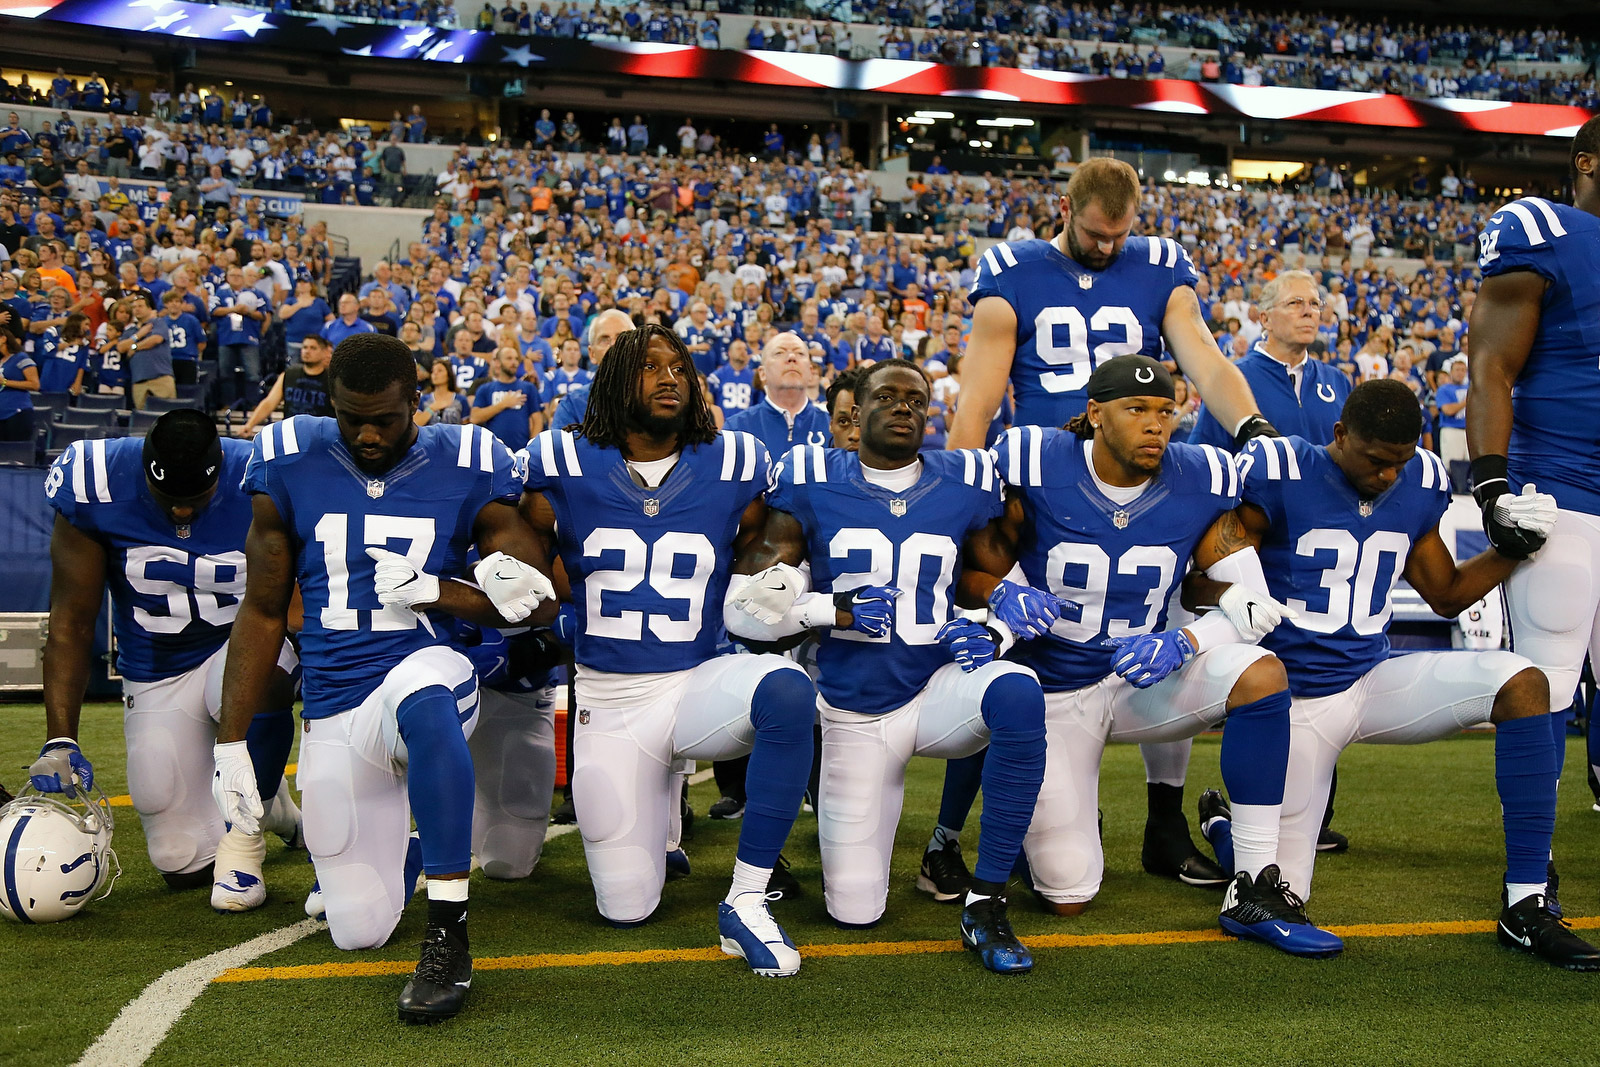 America watched as NFL players united in protest after Trumps criticism. These are the most powerful photos